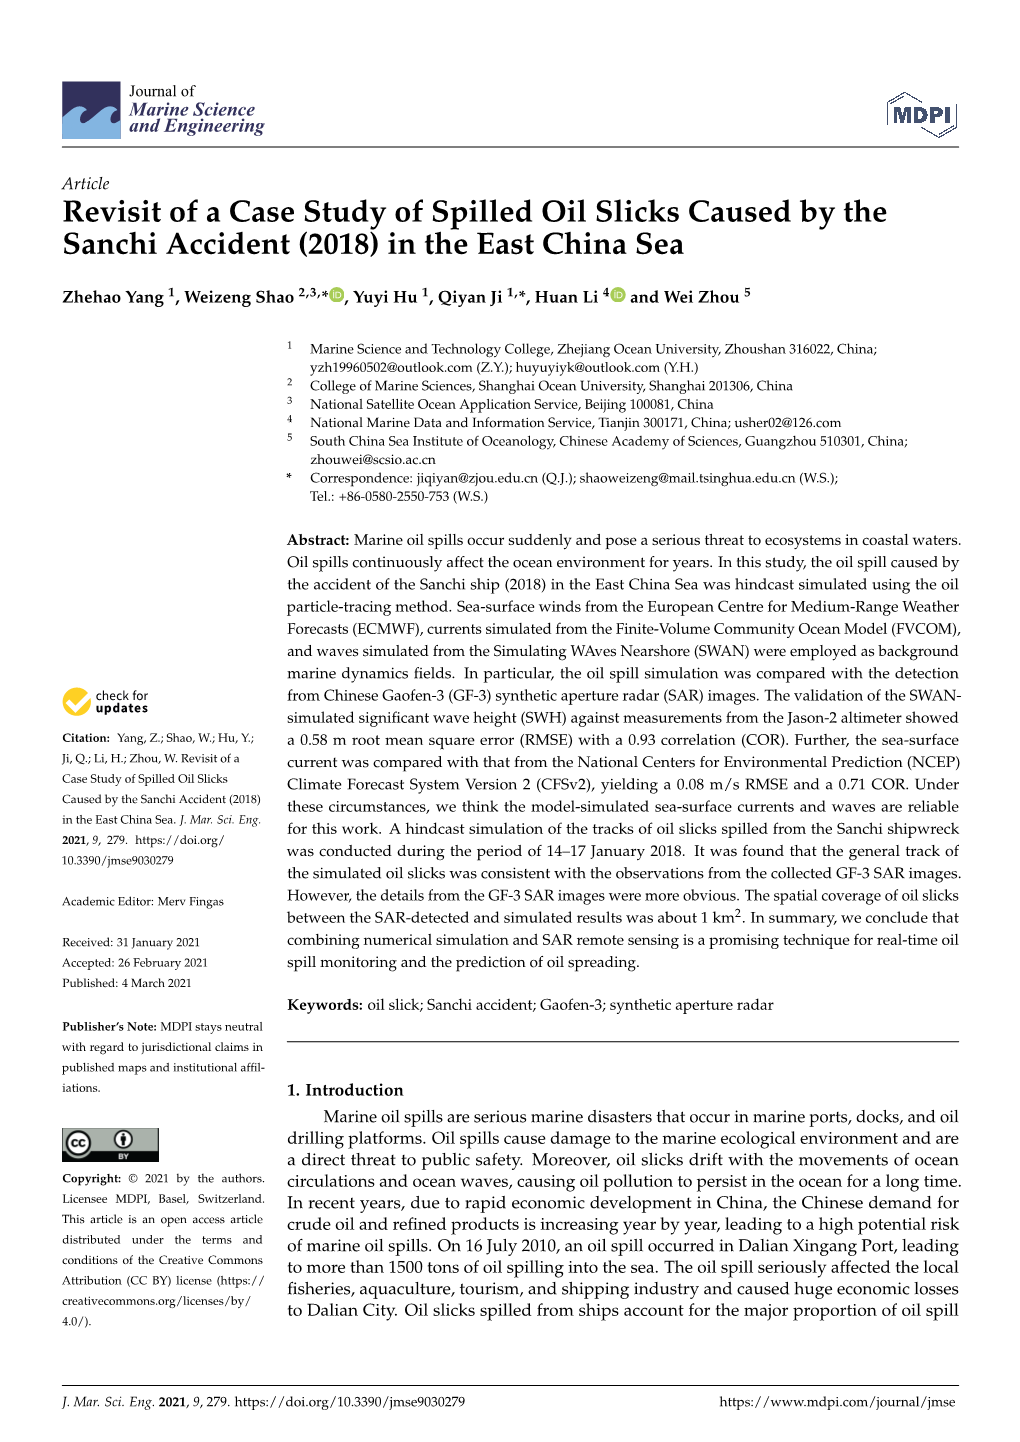 Revisit of a Case Study of Spilled Oil Slicks Caused by the Sanchi Accident (2018) in the East China Sea